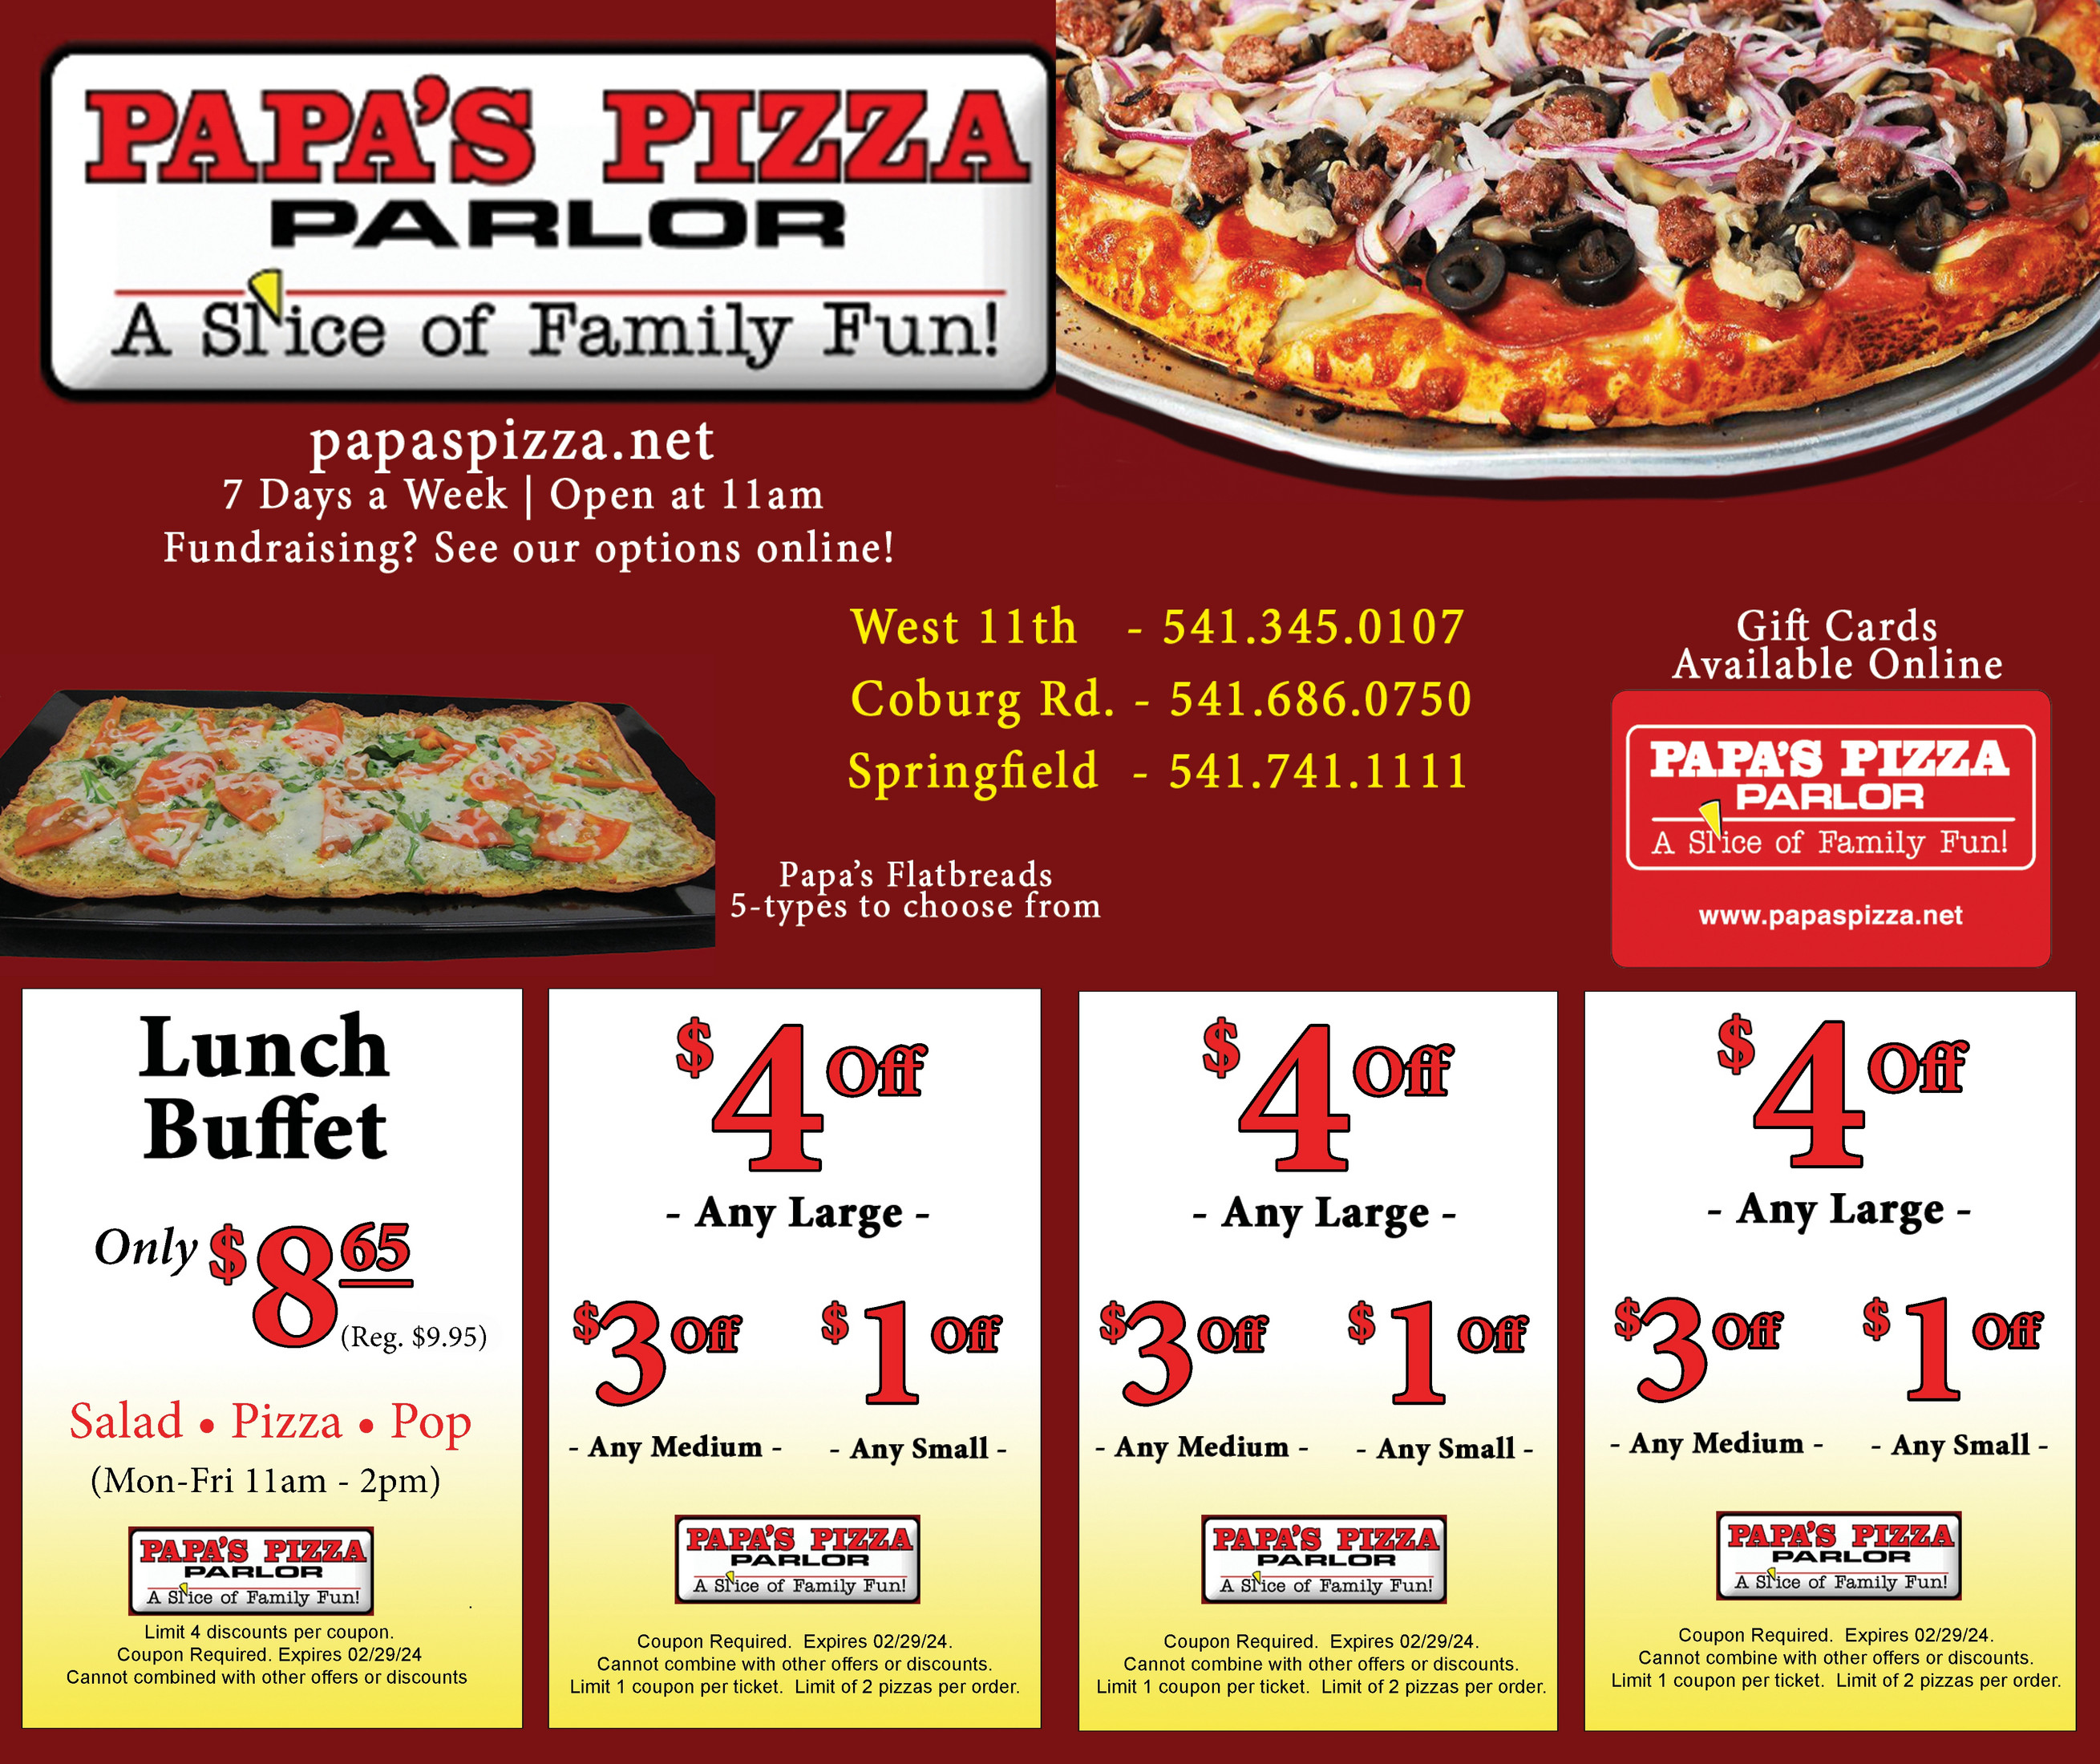 Papa's Pizza Parlor Springfield - Lane Restaurants: Supporting